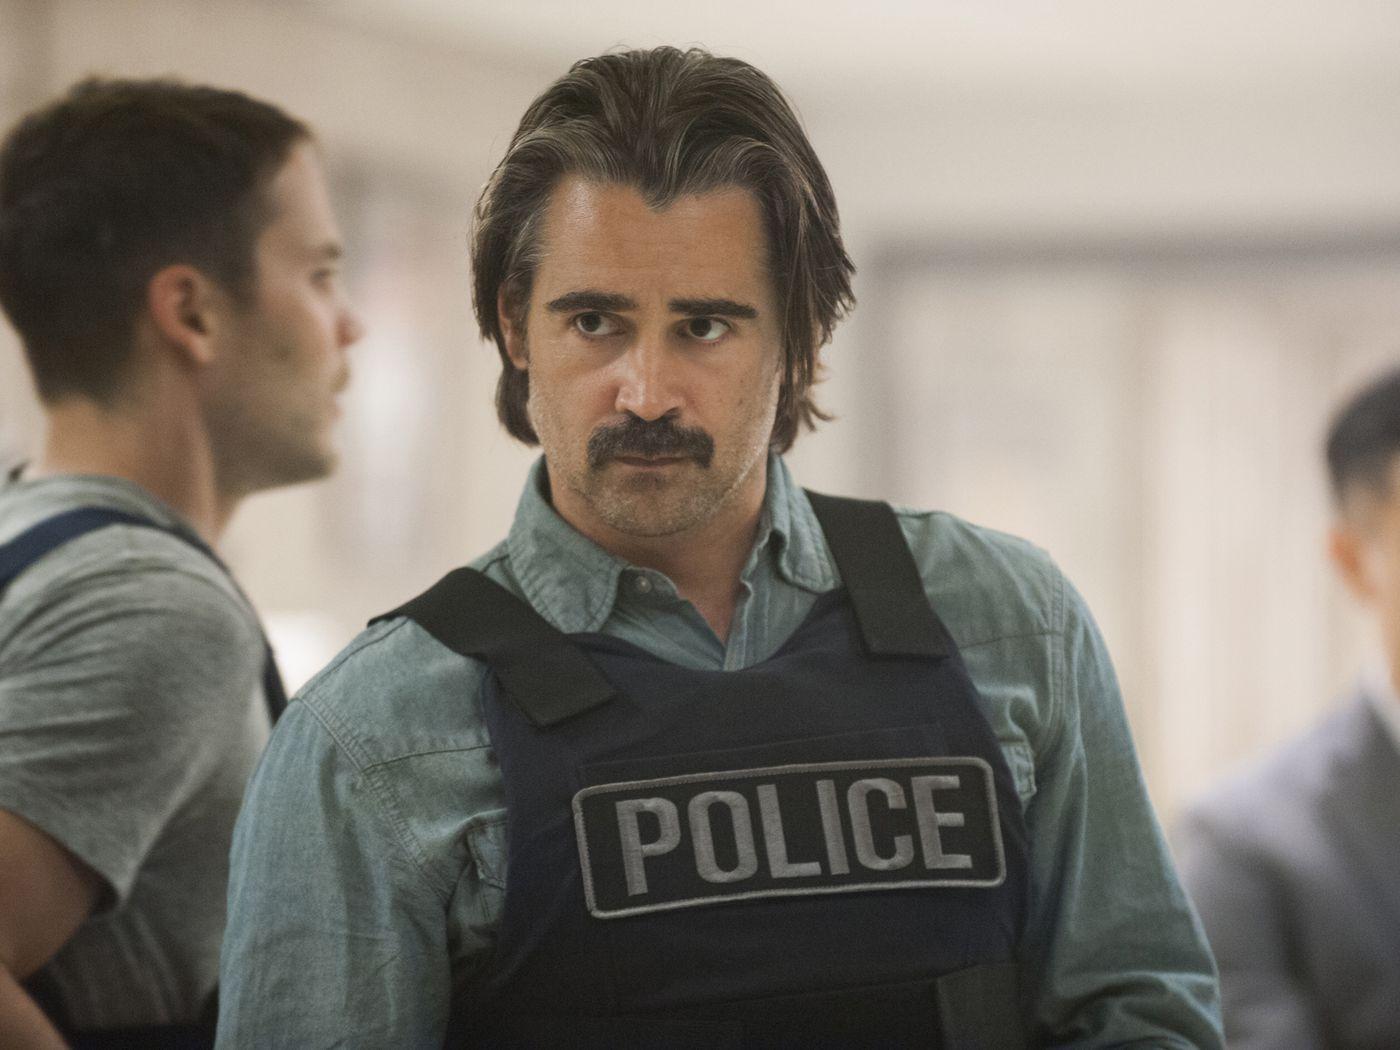 When it comes to damaged antiheroes, True Detective tries to have it